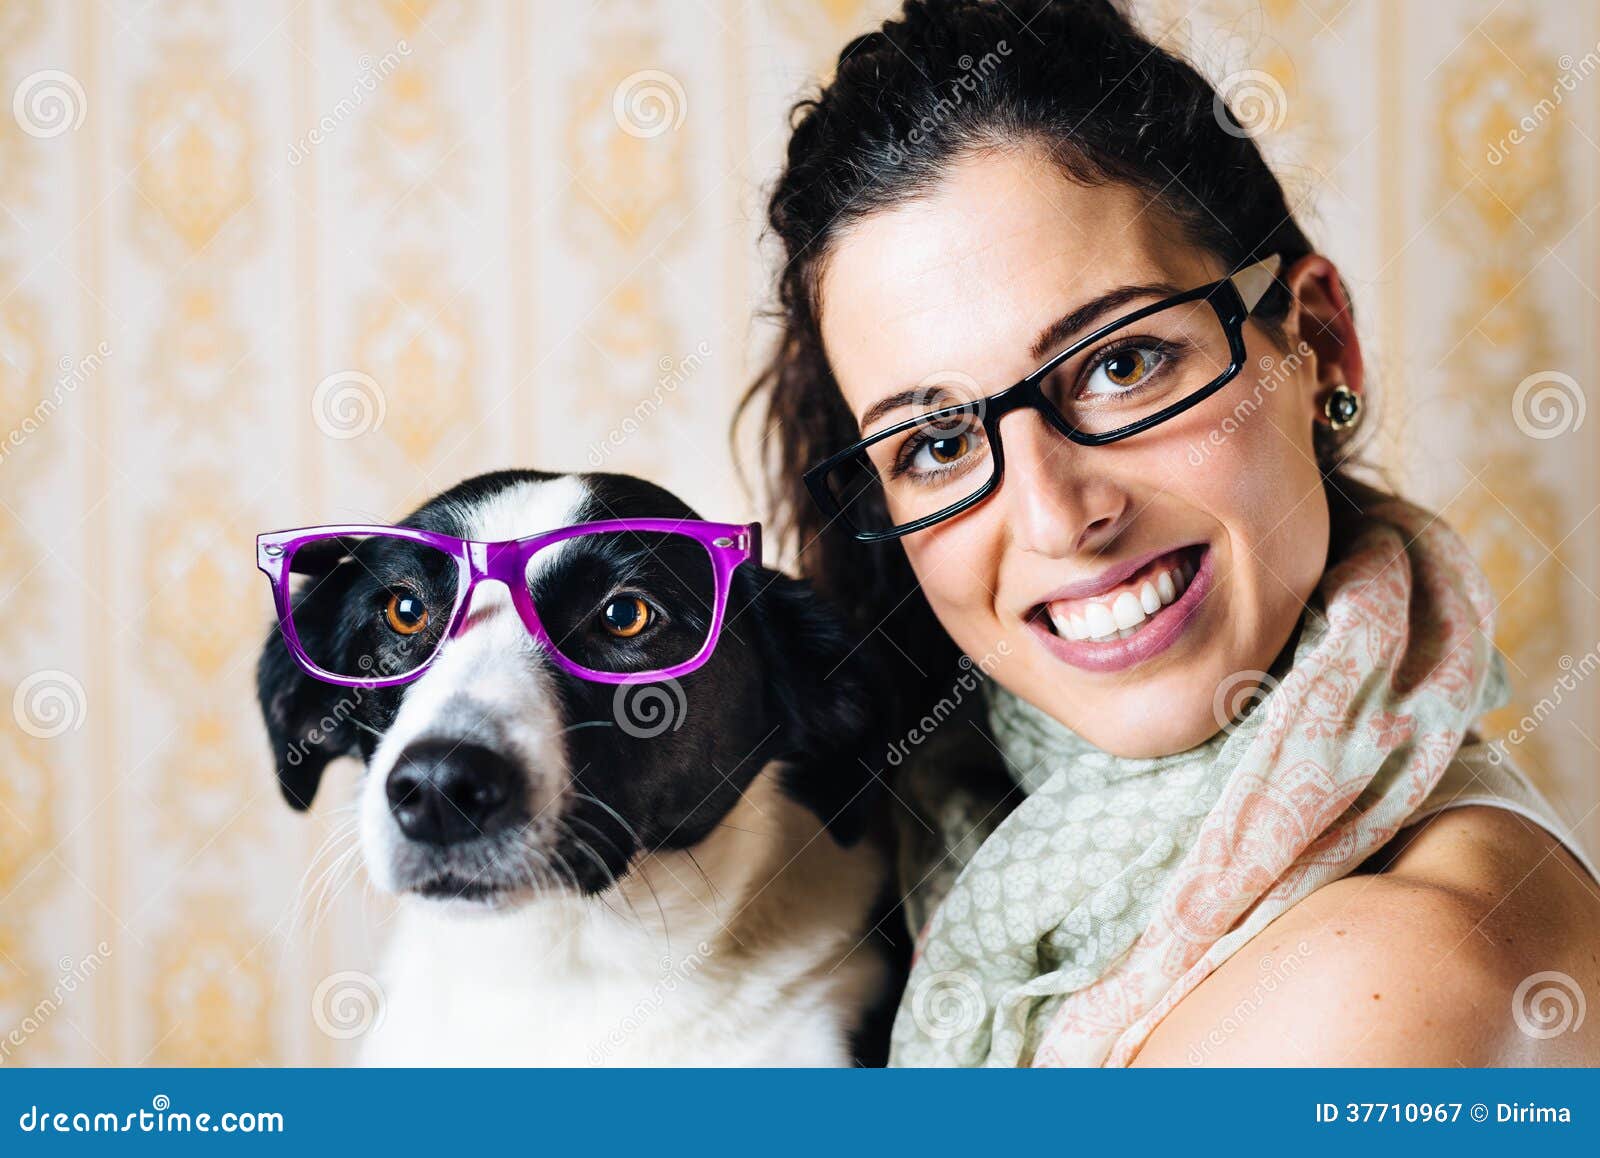 Funny Woman and Dog with Glasses Portrait Stock Image - Image of looking,  lovely: 37710967